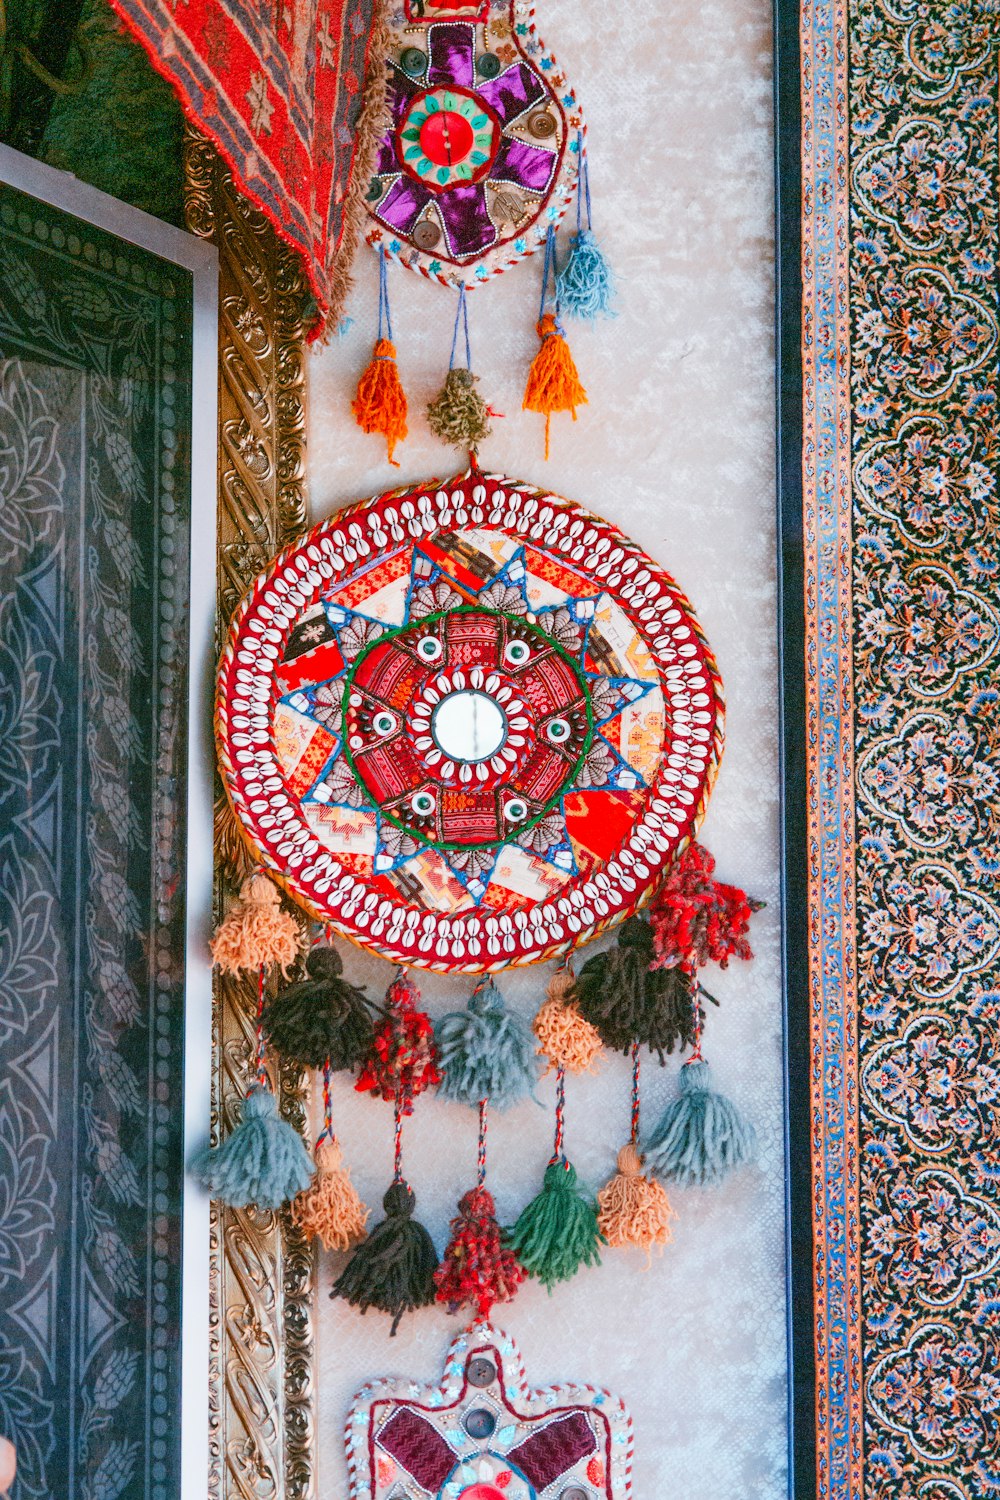 a decorative wall hanging with a mirror and tassels